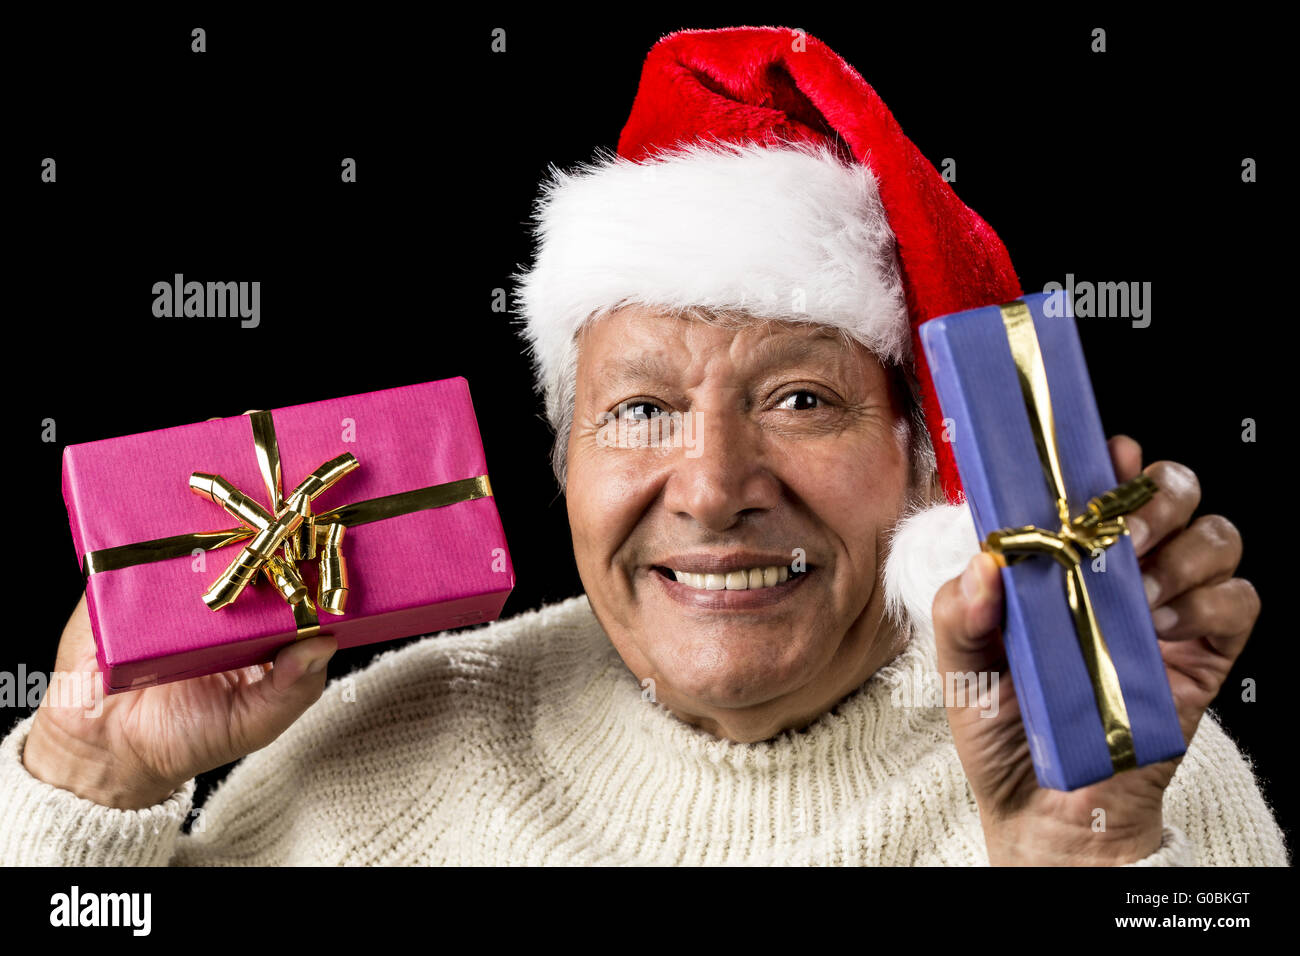 Lighthearted, Smiling Old Man Offering Two Gifts Stock Photo